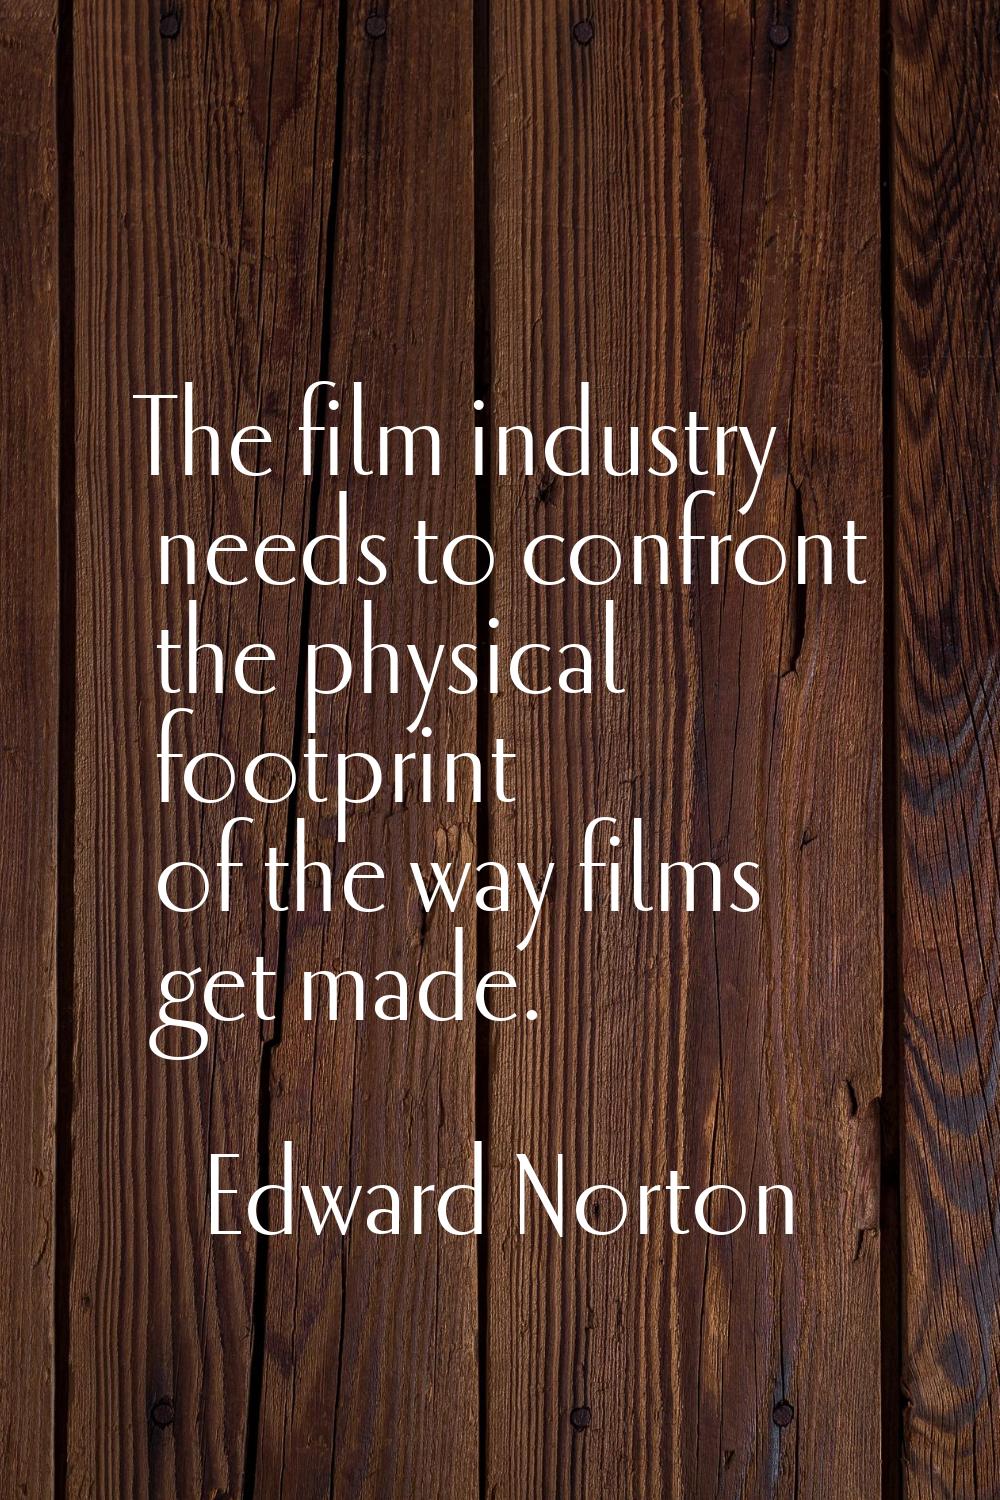 The film industry needs to confront the physical footprint of the way films get made.